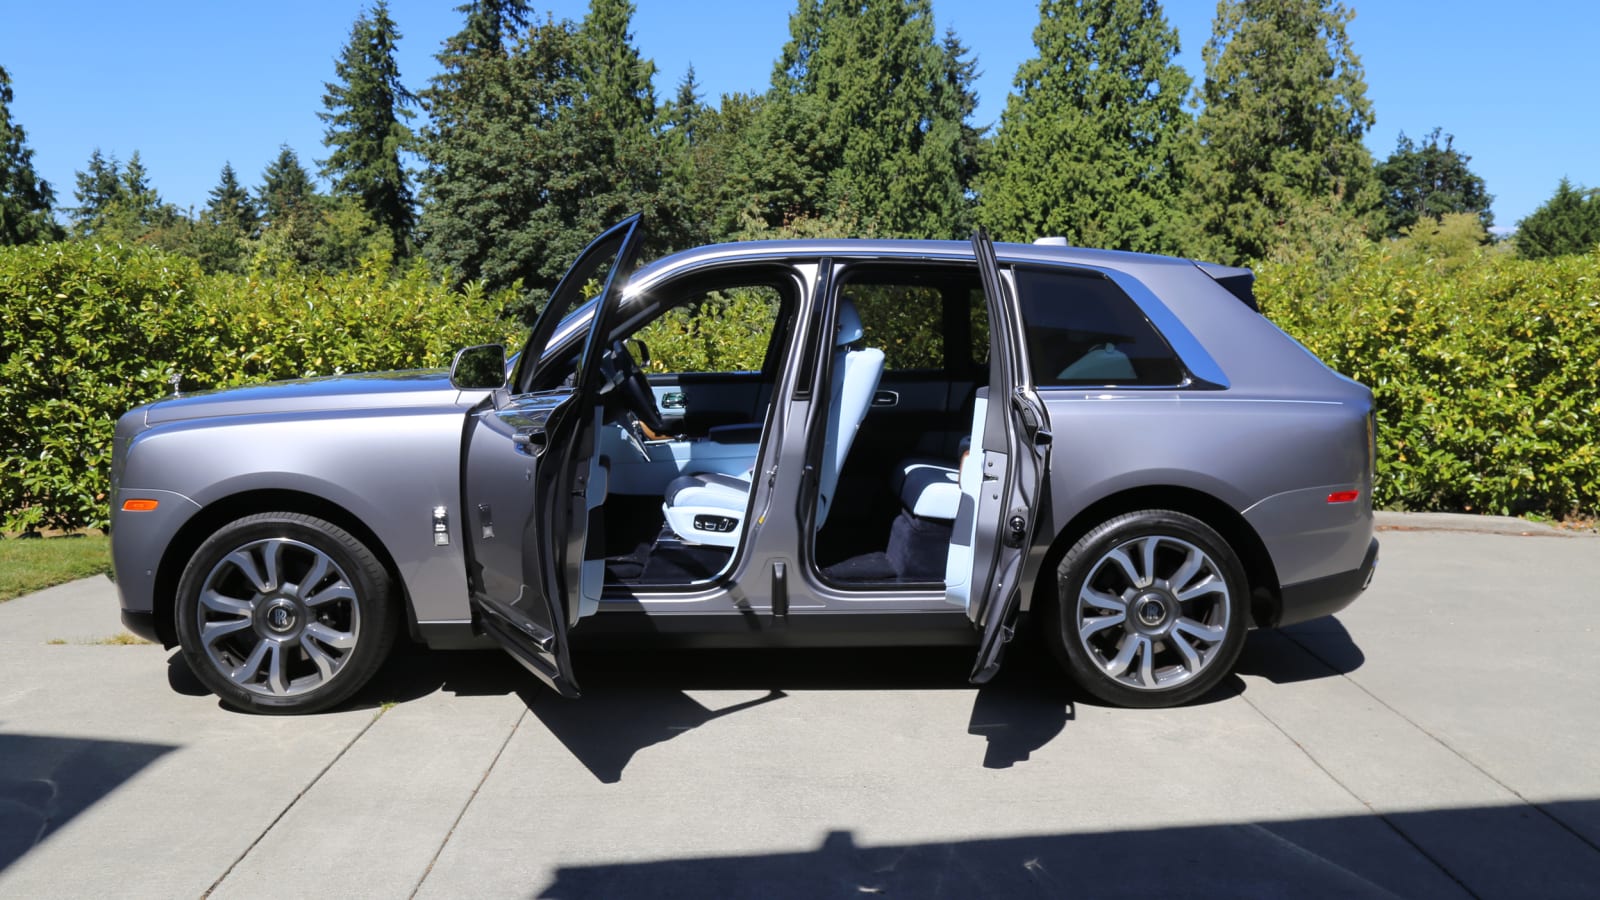 2020 Rolls-Royce Cullinan Review, Pricing, and Specs